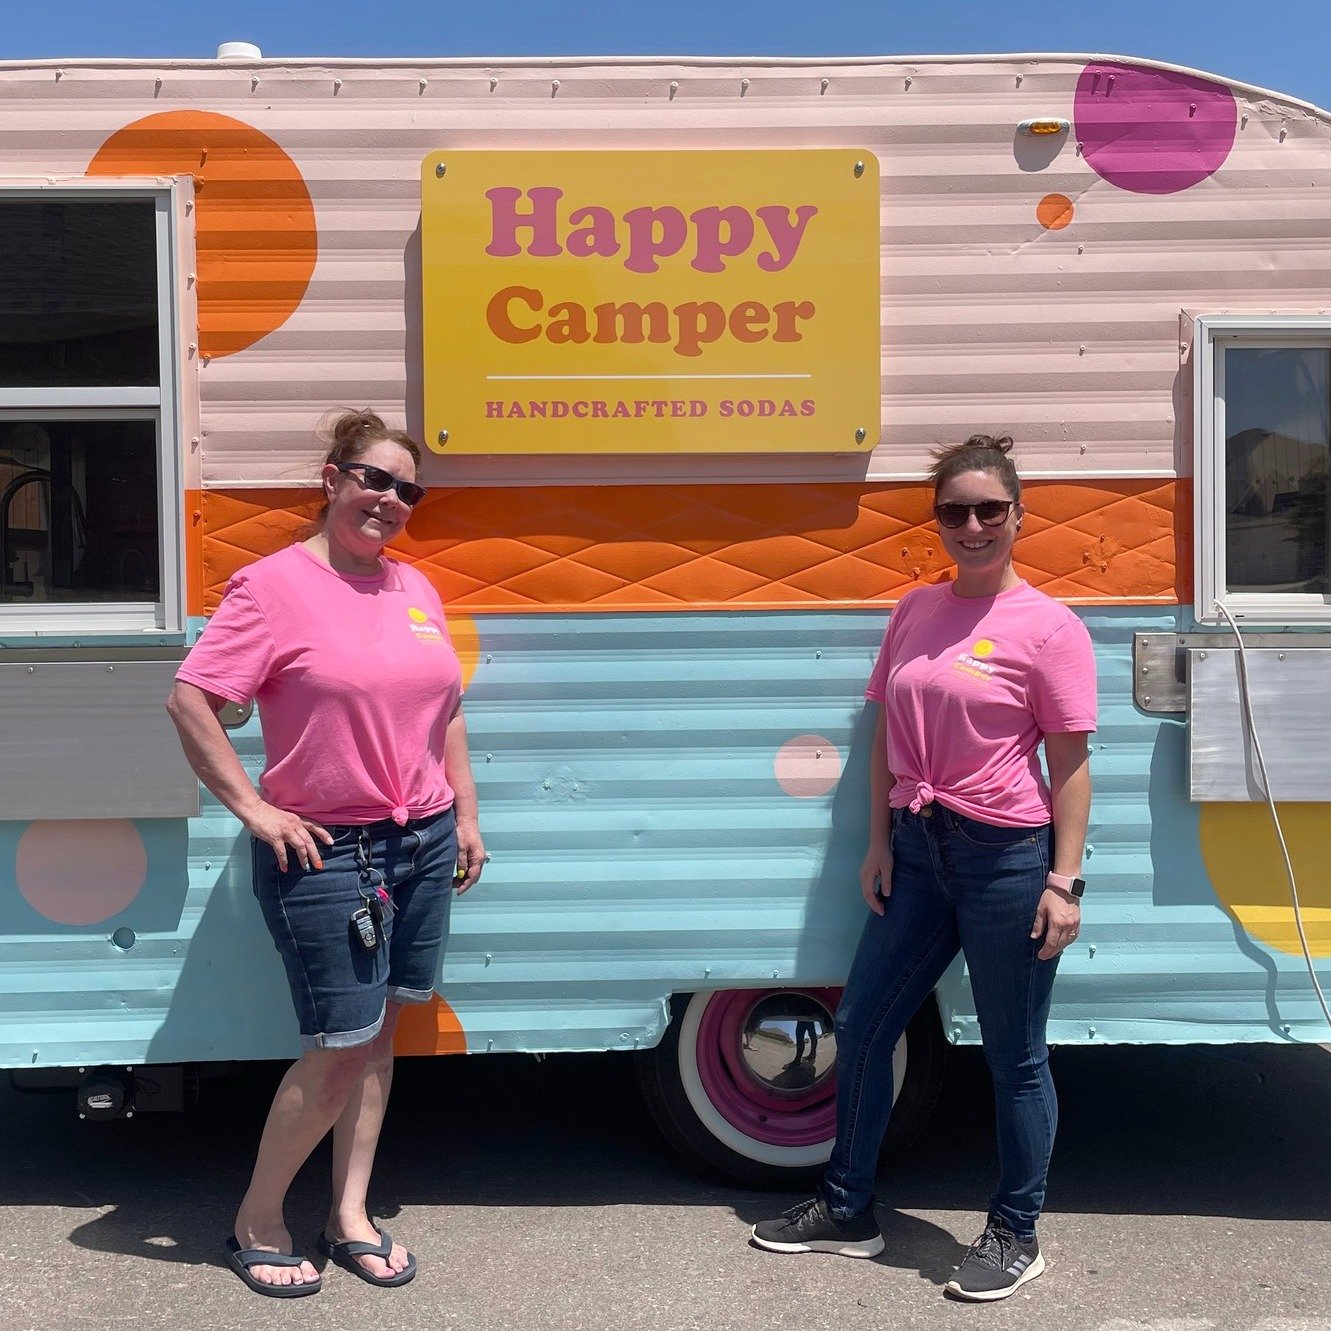 Happy Mother's Day from Happy Camper Handcrafted Sodas, AND to our fearless leaders (also mothers!), Melinda and Joey. Much love from your sister-in-law / daughter / social media guru. Have the best day! &mdash;Kenna